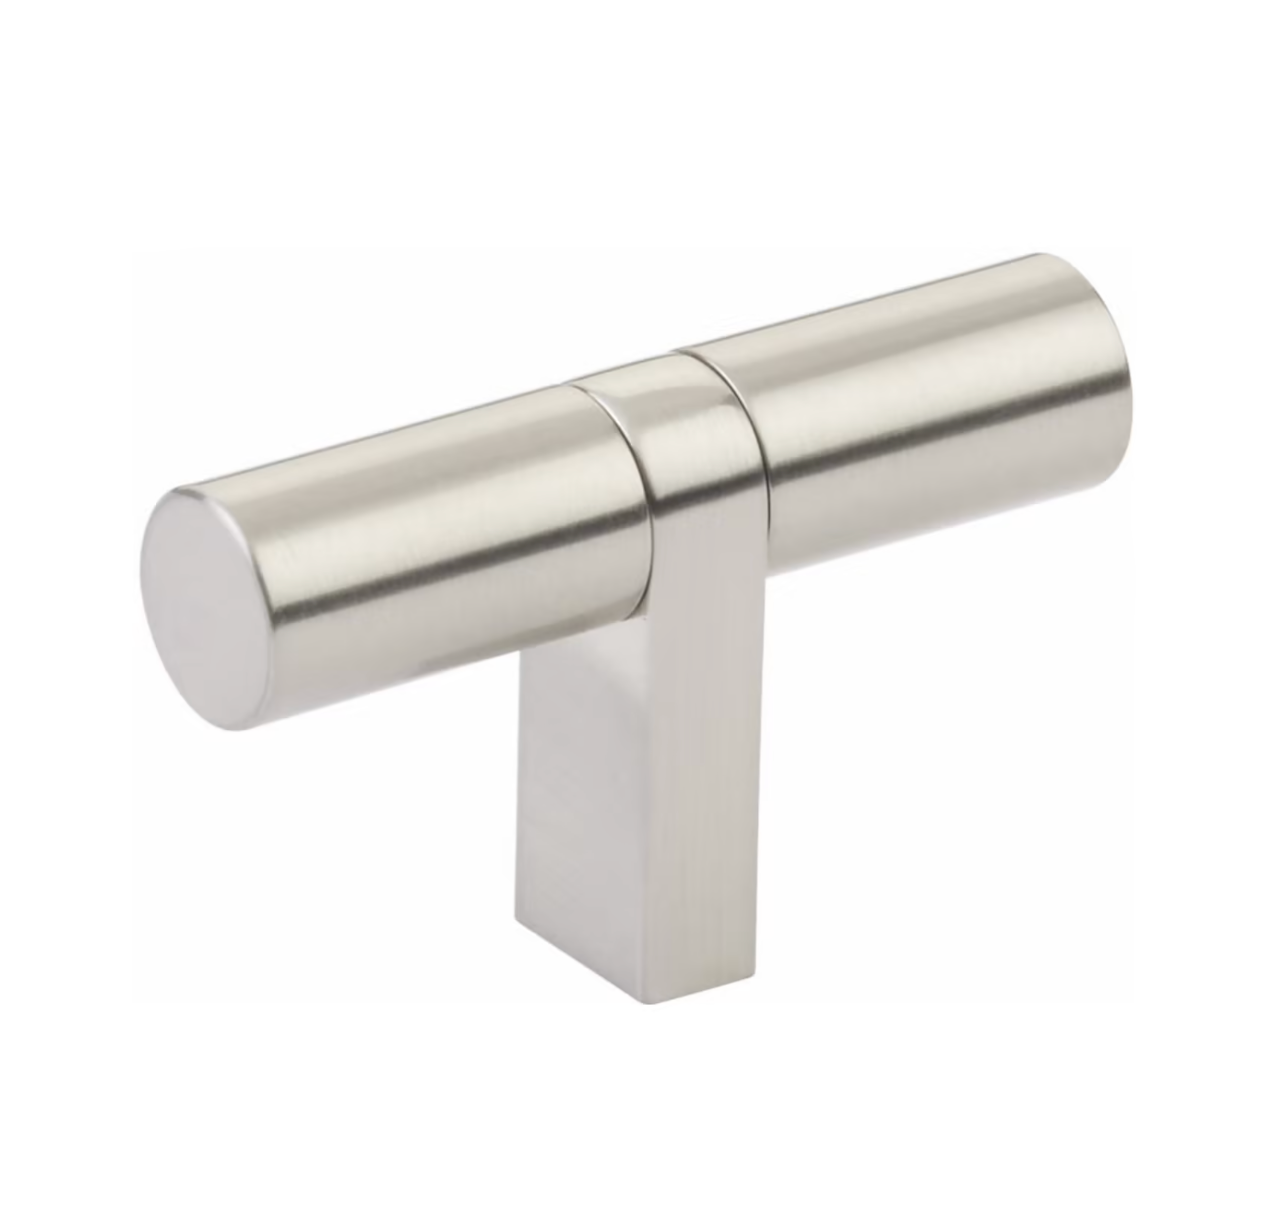 Smooth "Converse No.2" Satin Nickel Cabinet Knobs and Drawer Pulls - Industry Hardware